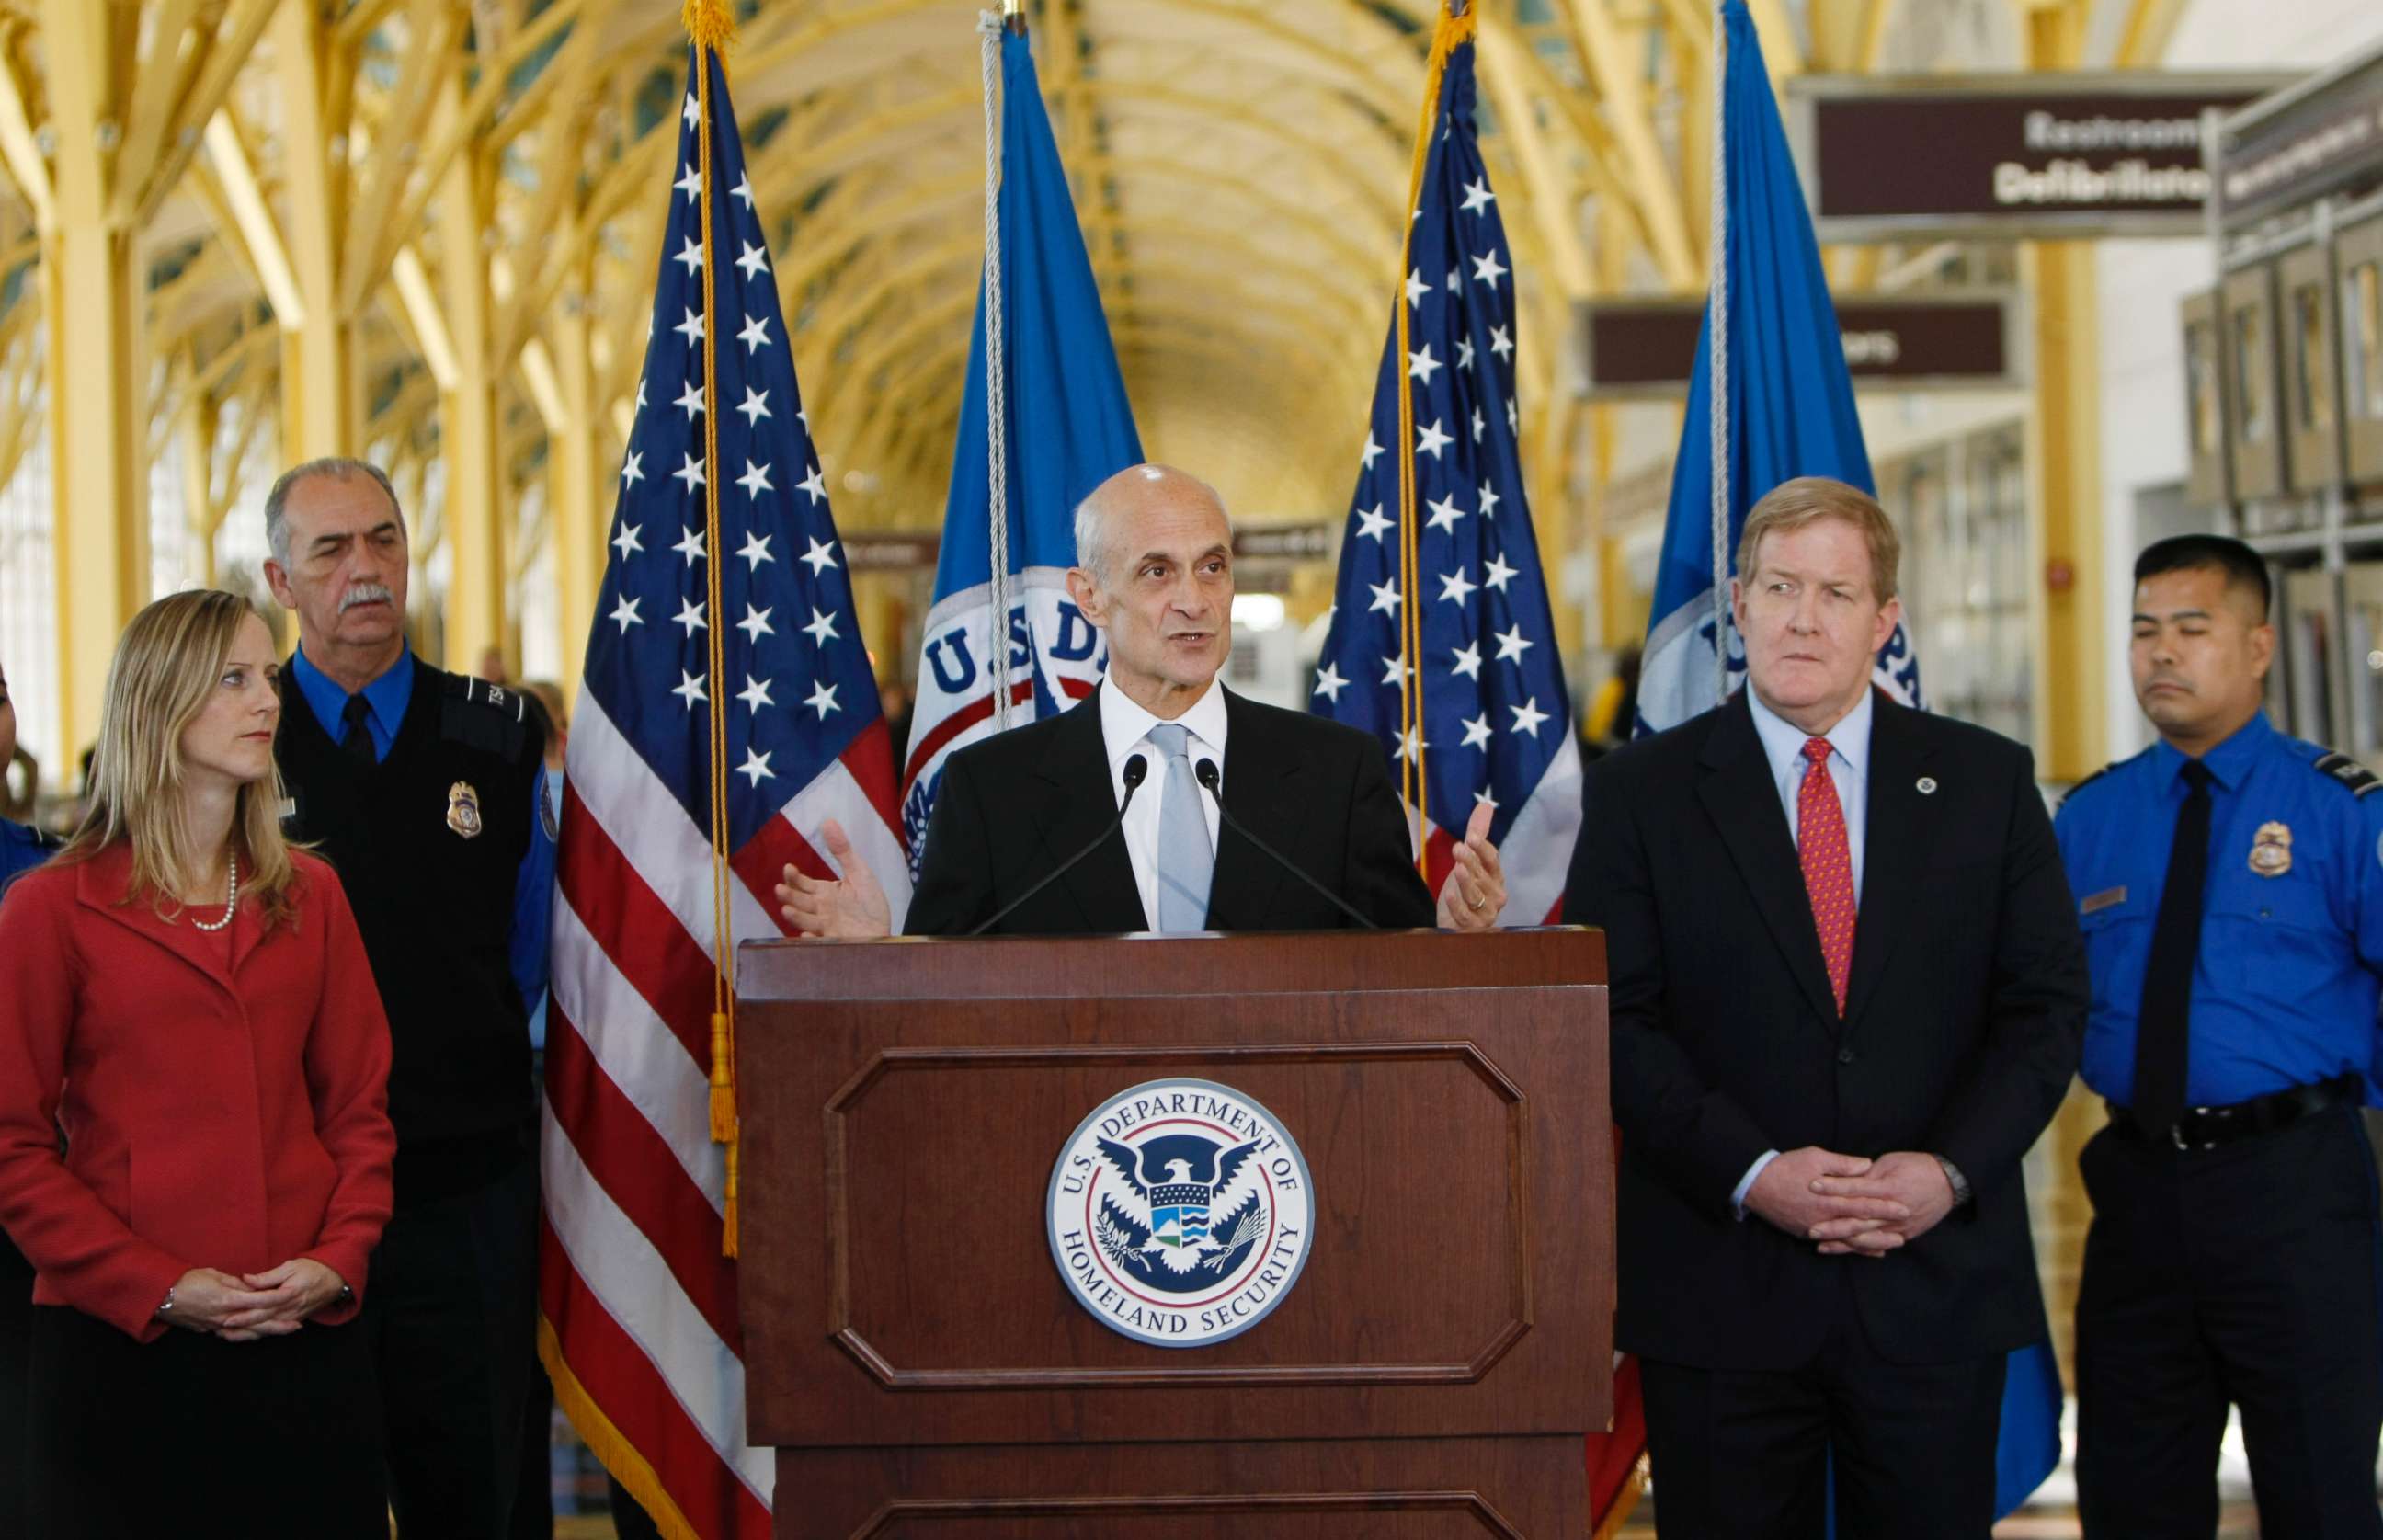 PHOTO: Homeland Security Director Michael Chertoff during a news conference at Washington's Ronald Reagan National Airport, Oct. 22, 2008, with Deputy Assistant Secretary for Policy Kathy Kraninger, left.